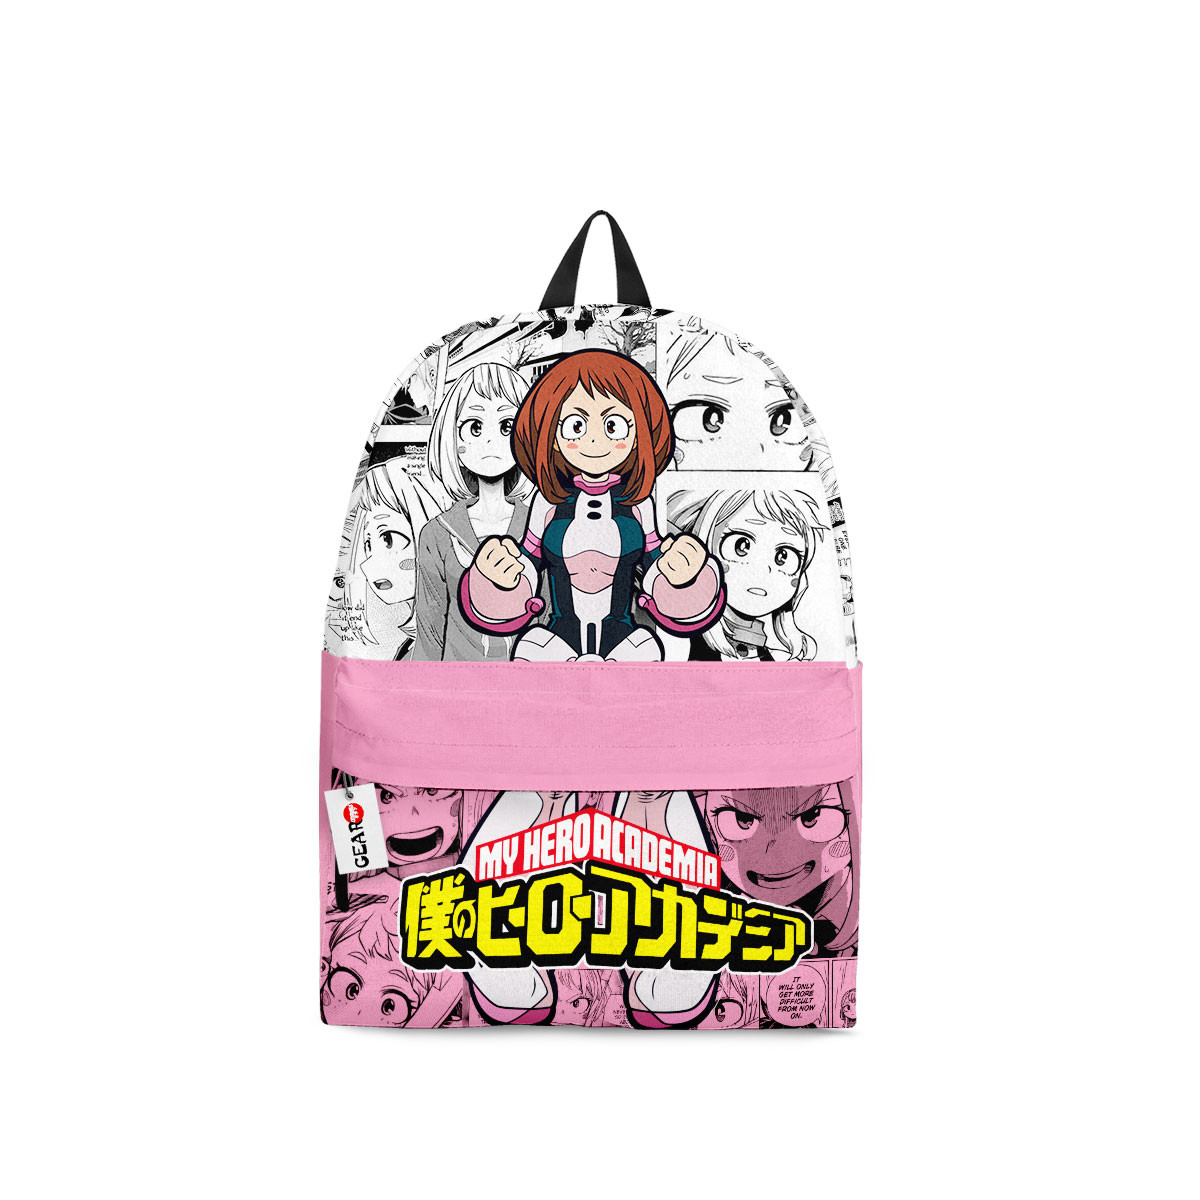 Latest Anime style products 236